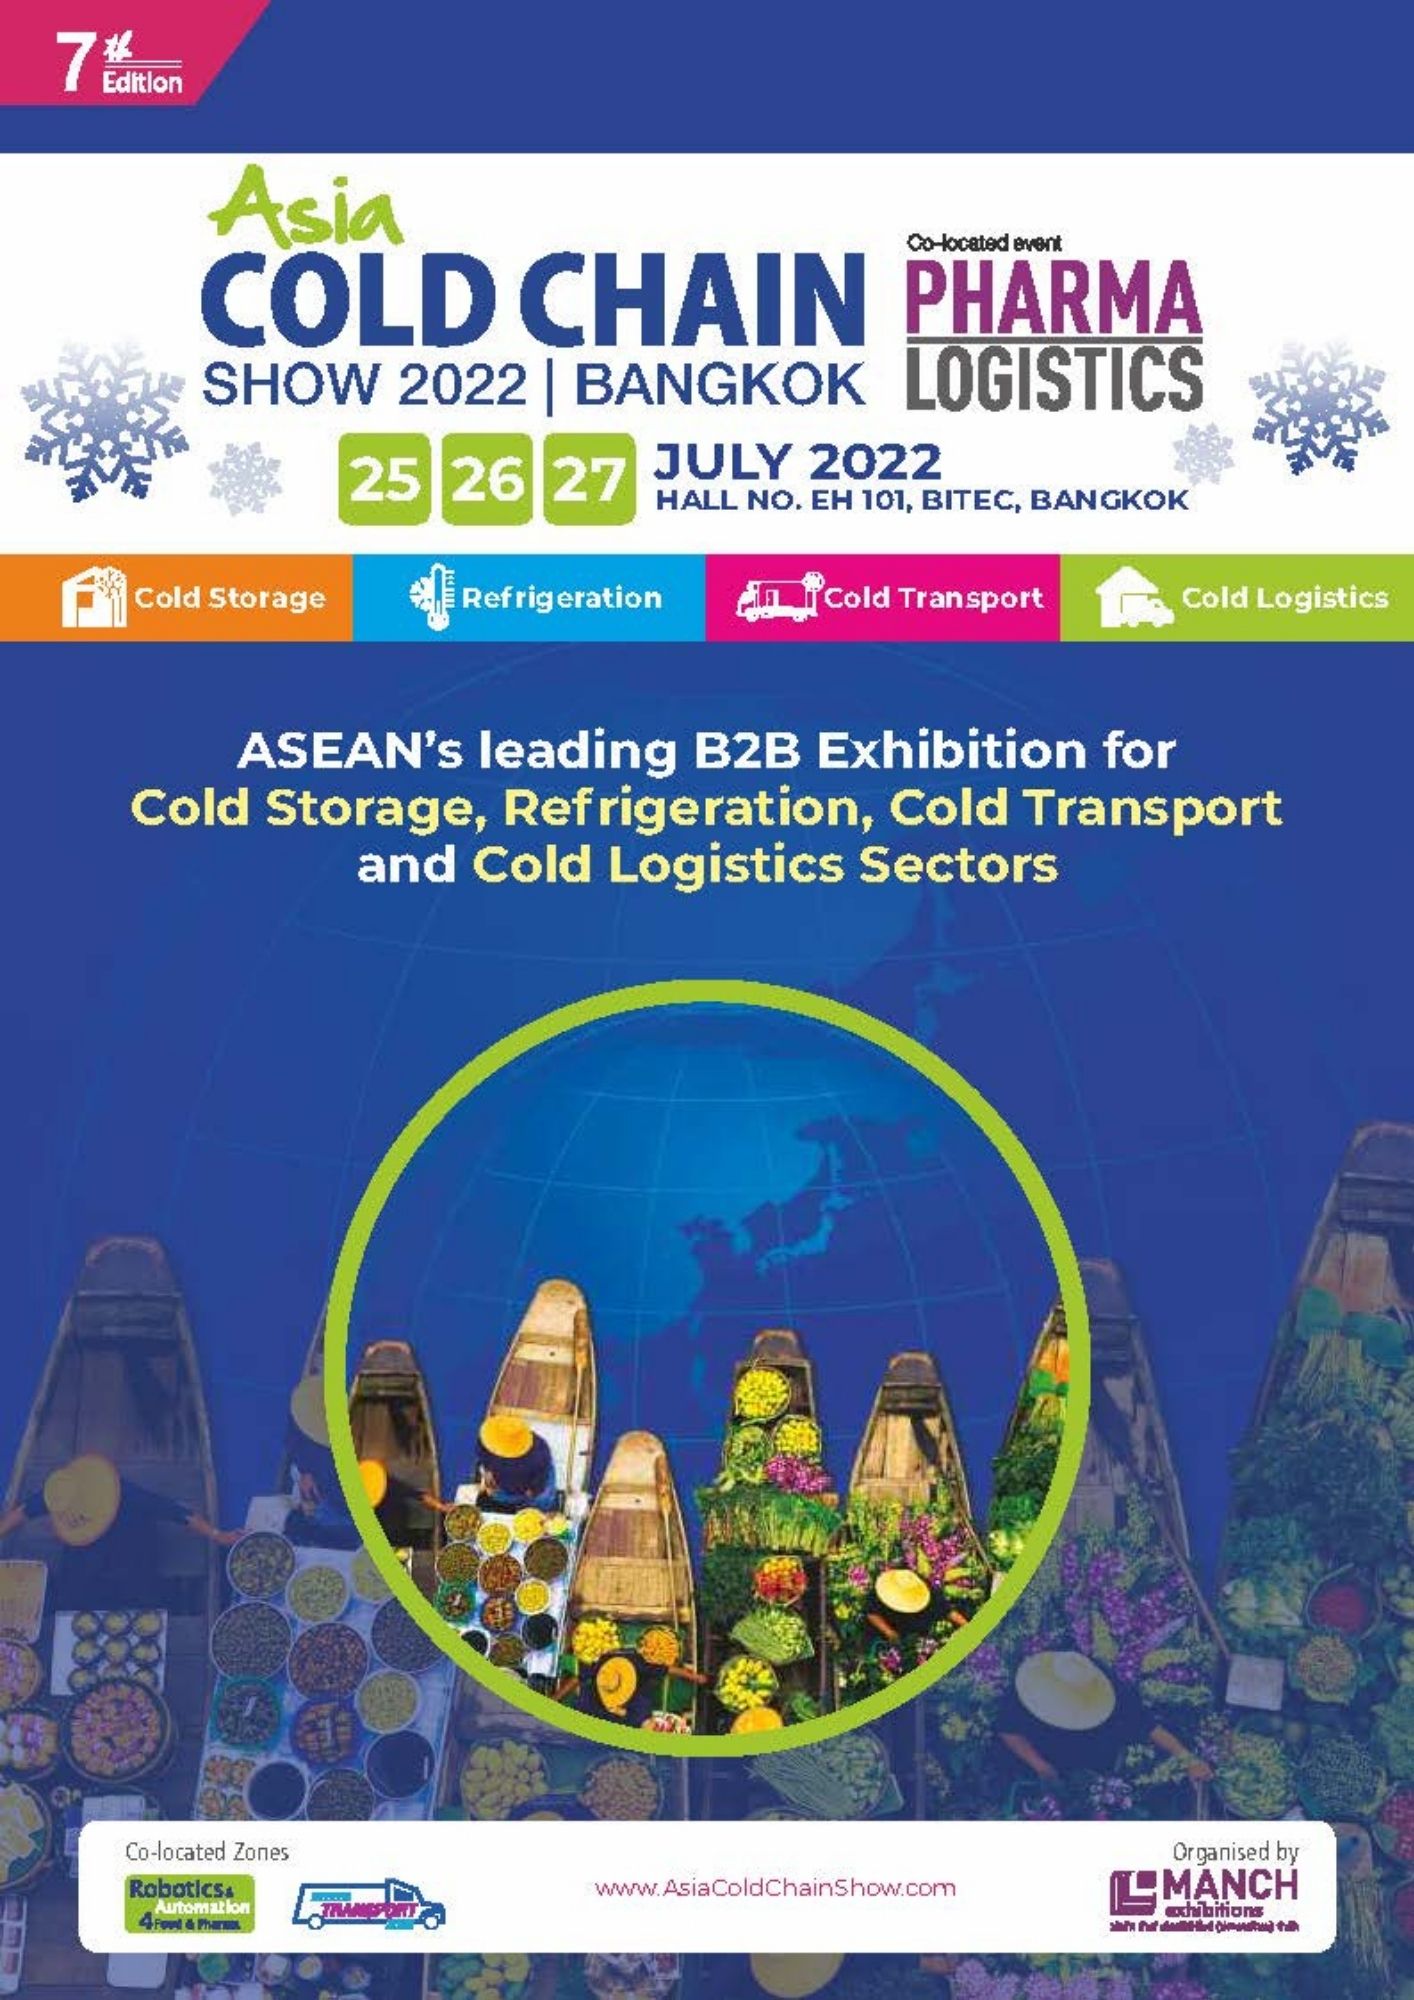 Asia Cold Chain Show 2022 In Bangkok